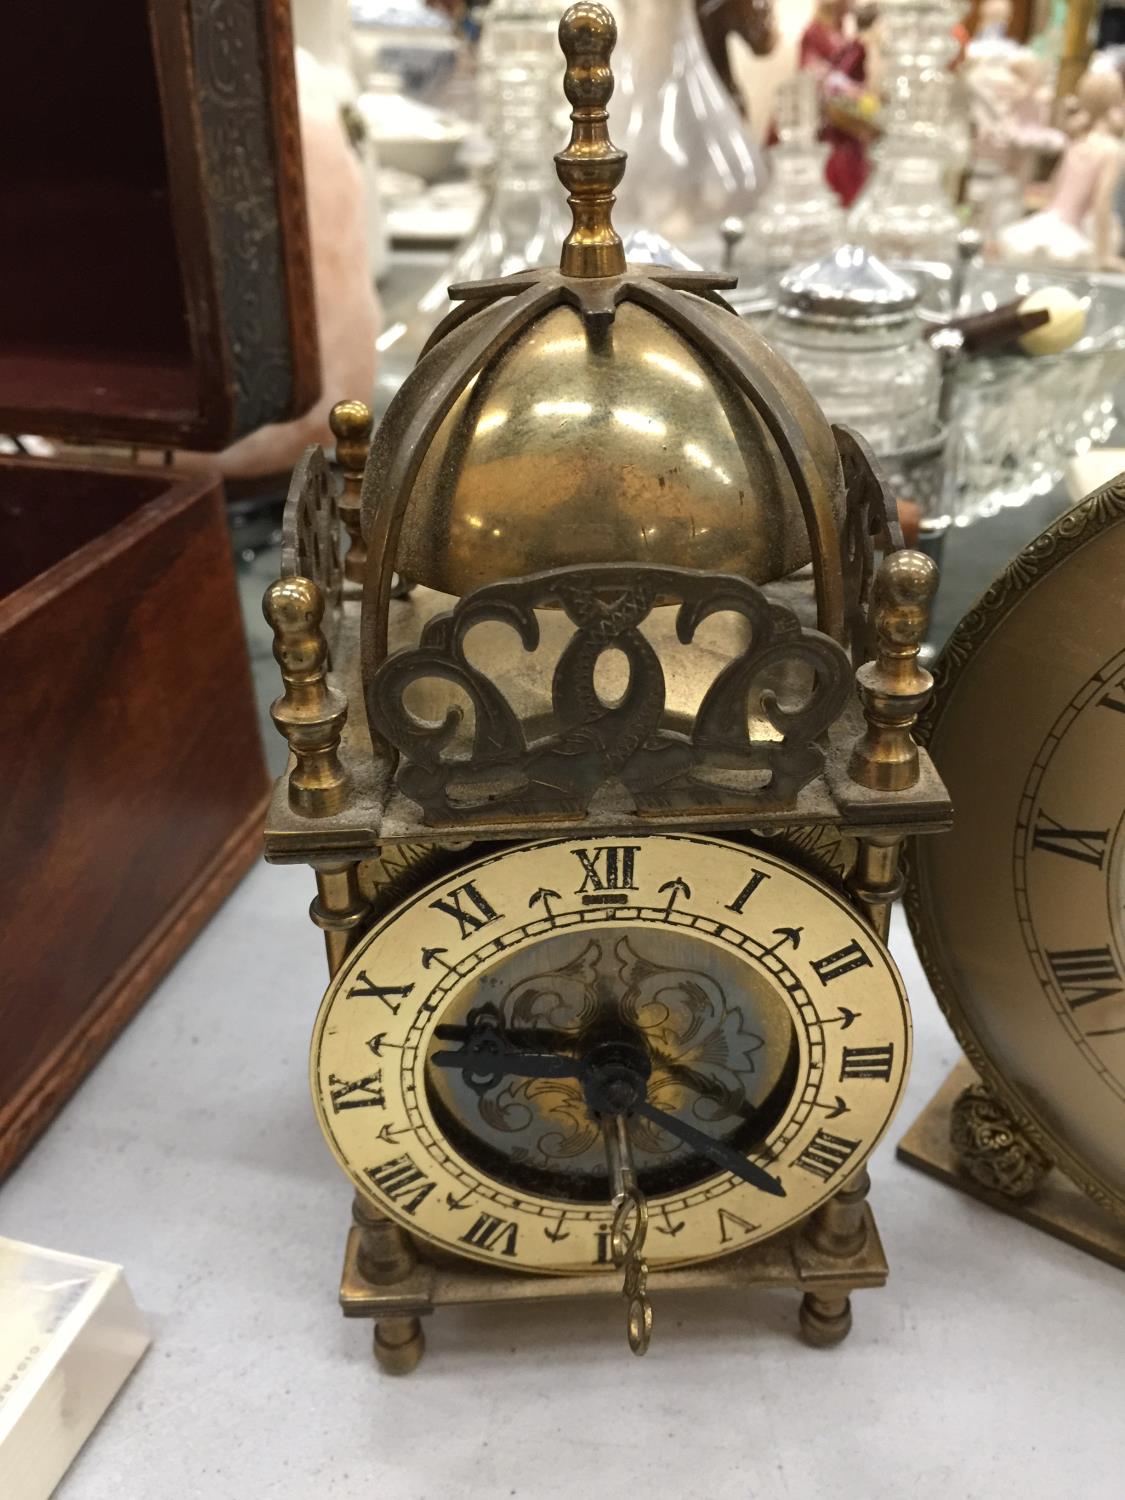 THREE VINTAGE CLOCKS TO INCLUDE A BRASS LANTERN CLOCK, A PETIT POINT MANTLE CLOCK AND ALARM CLOCK - Image 4 of 5